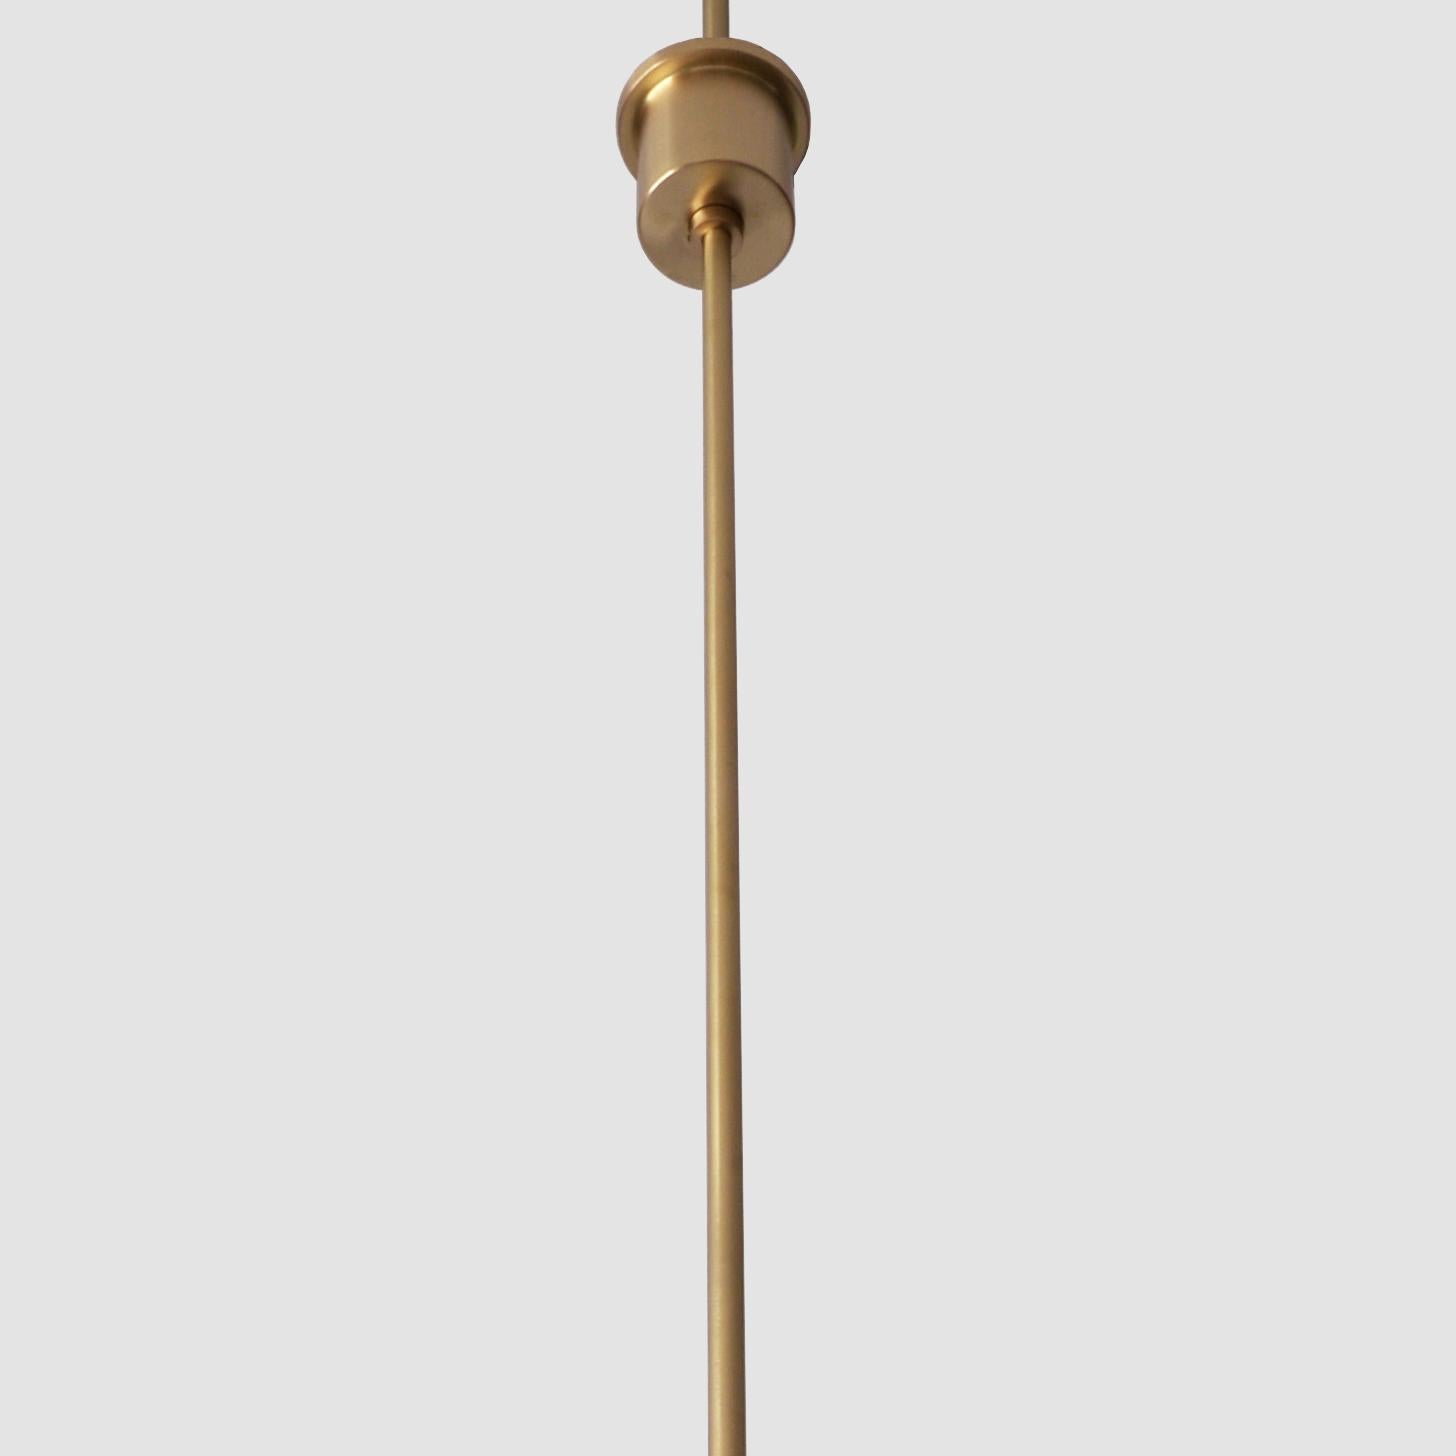 Bespoke Modernist Circular Pendant Light in Brushed Brass and Opal Glass, 2018 For Sale 2